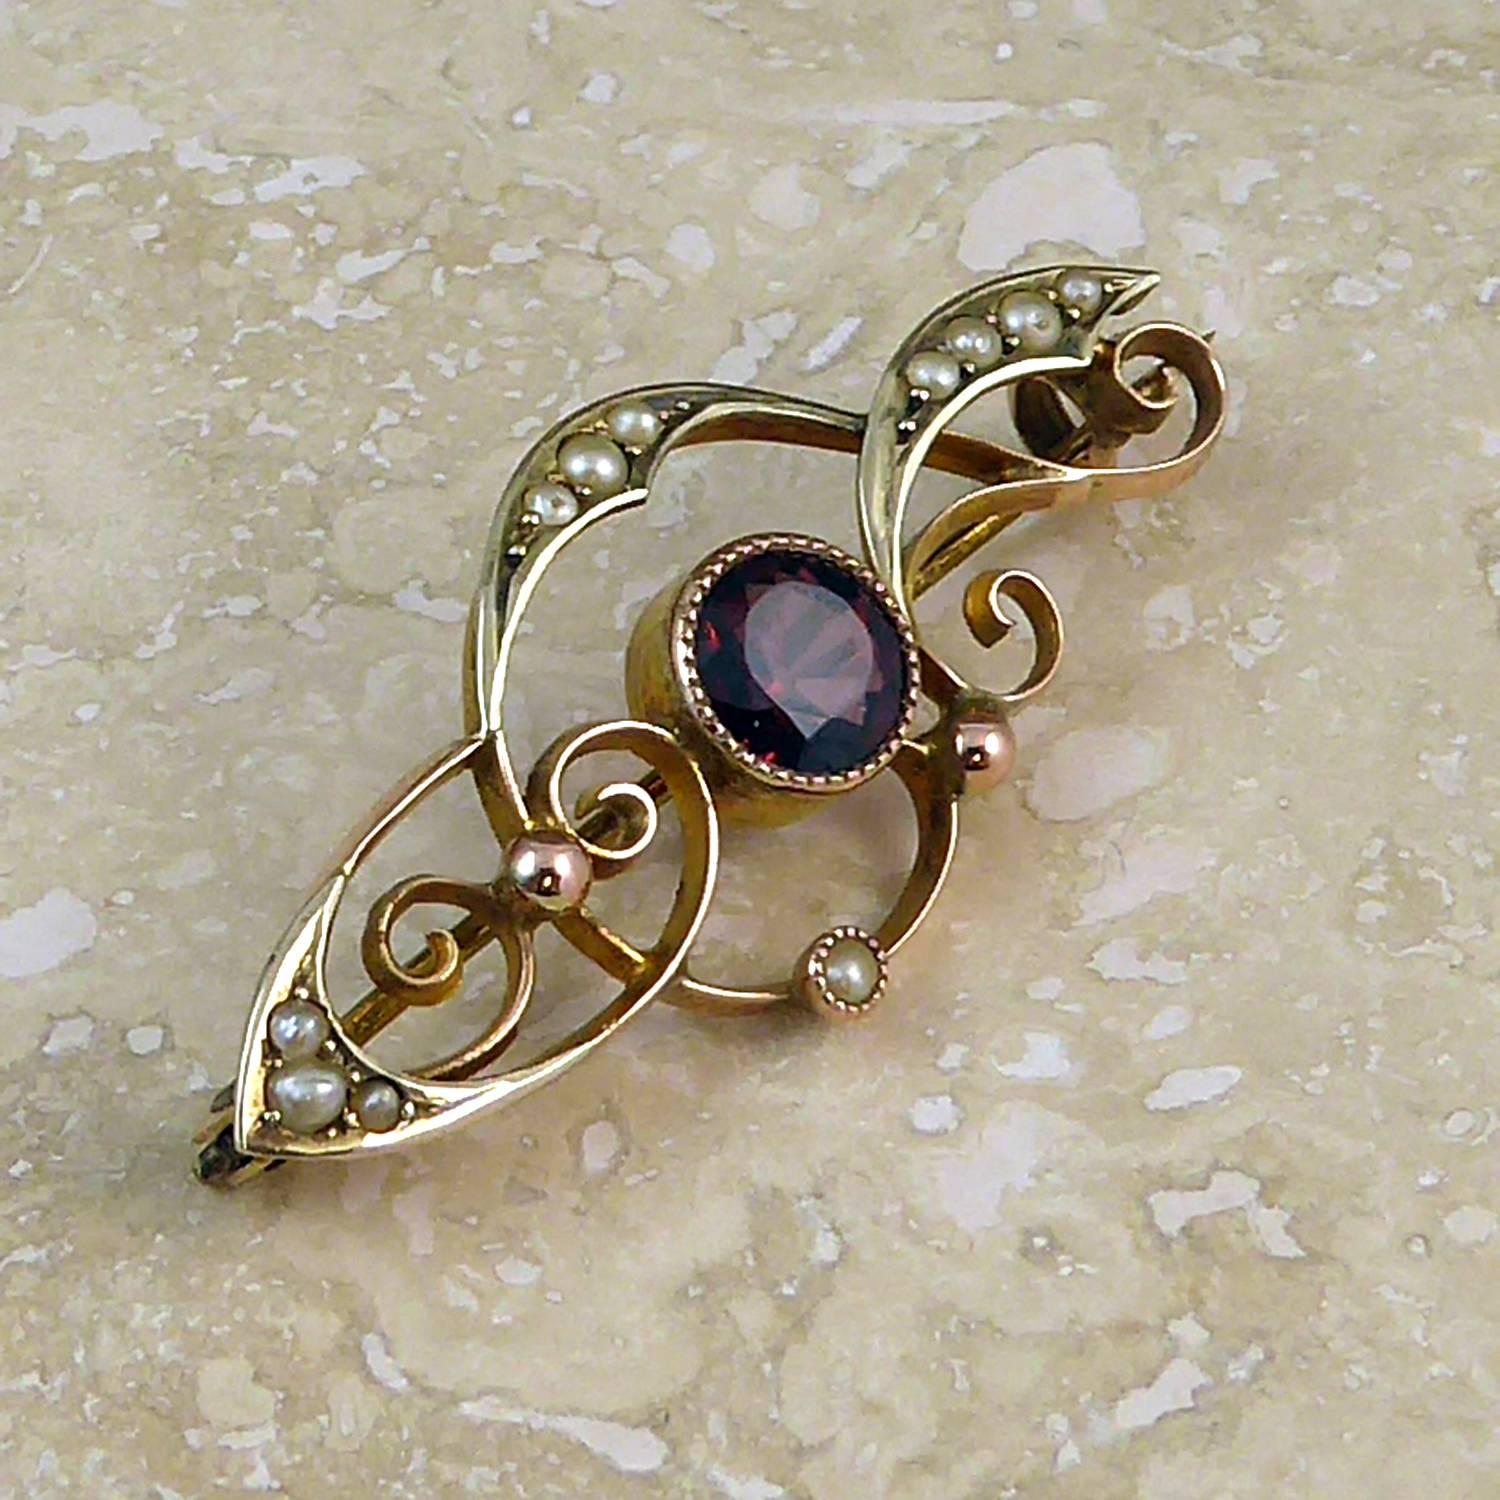 An antique brooch from the early 1900s crafted in the Art Nouveau fashion.  Set to the centre with a round faceted garnet of good purple/red colour, approx. 5.5mm diameter, and mounted in a rose gold collar with decorative edging.  Around the garnet